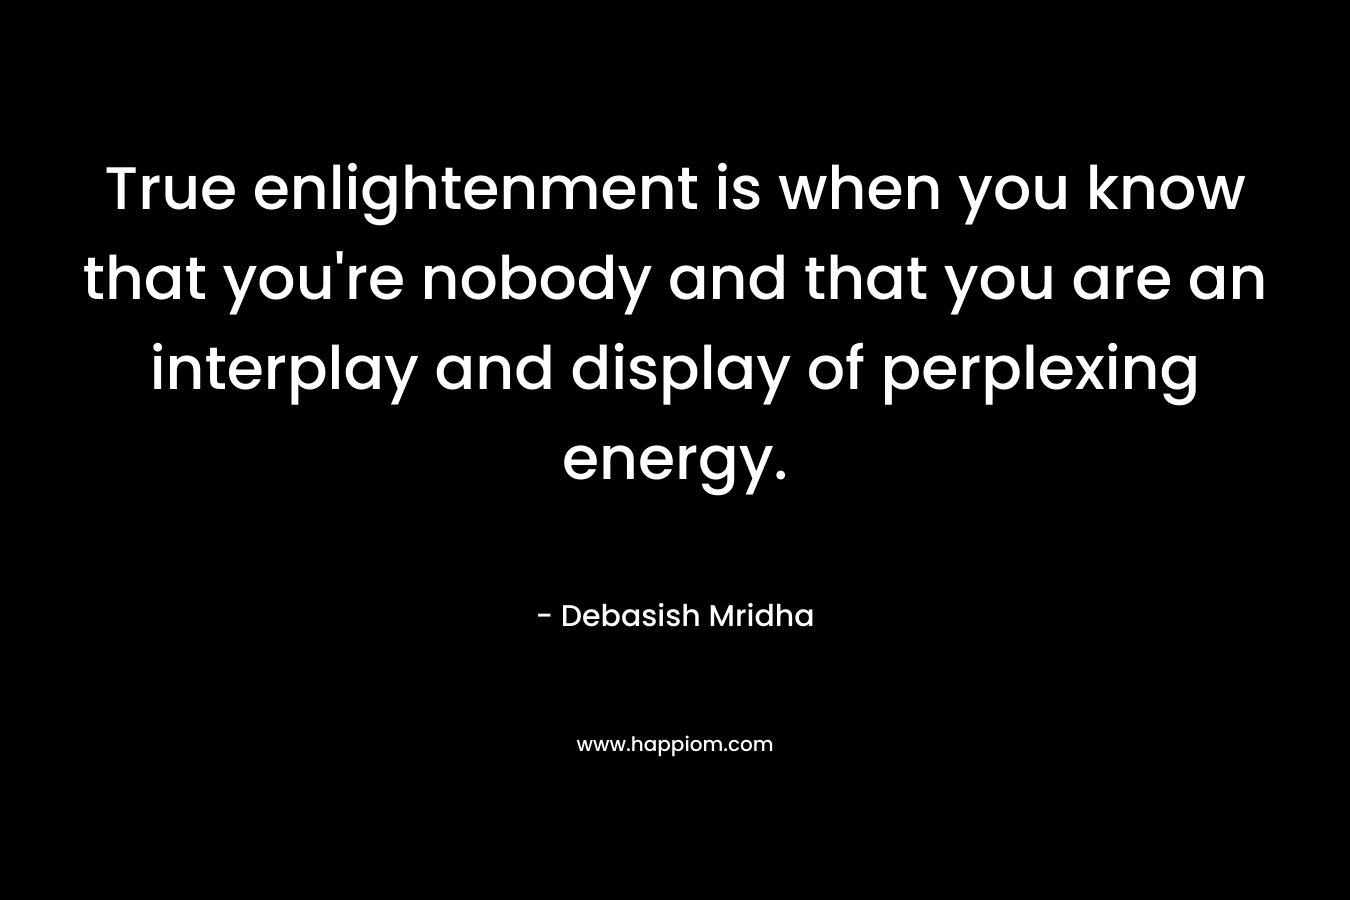 True enlightenment is when you know that you’re nobody and that you are an interplay and display of perplexing energy. – Debasish Mridha